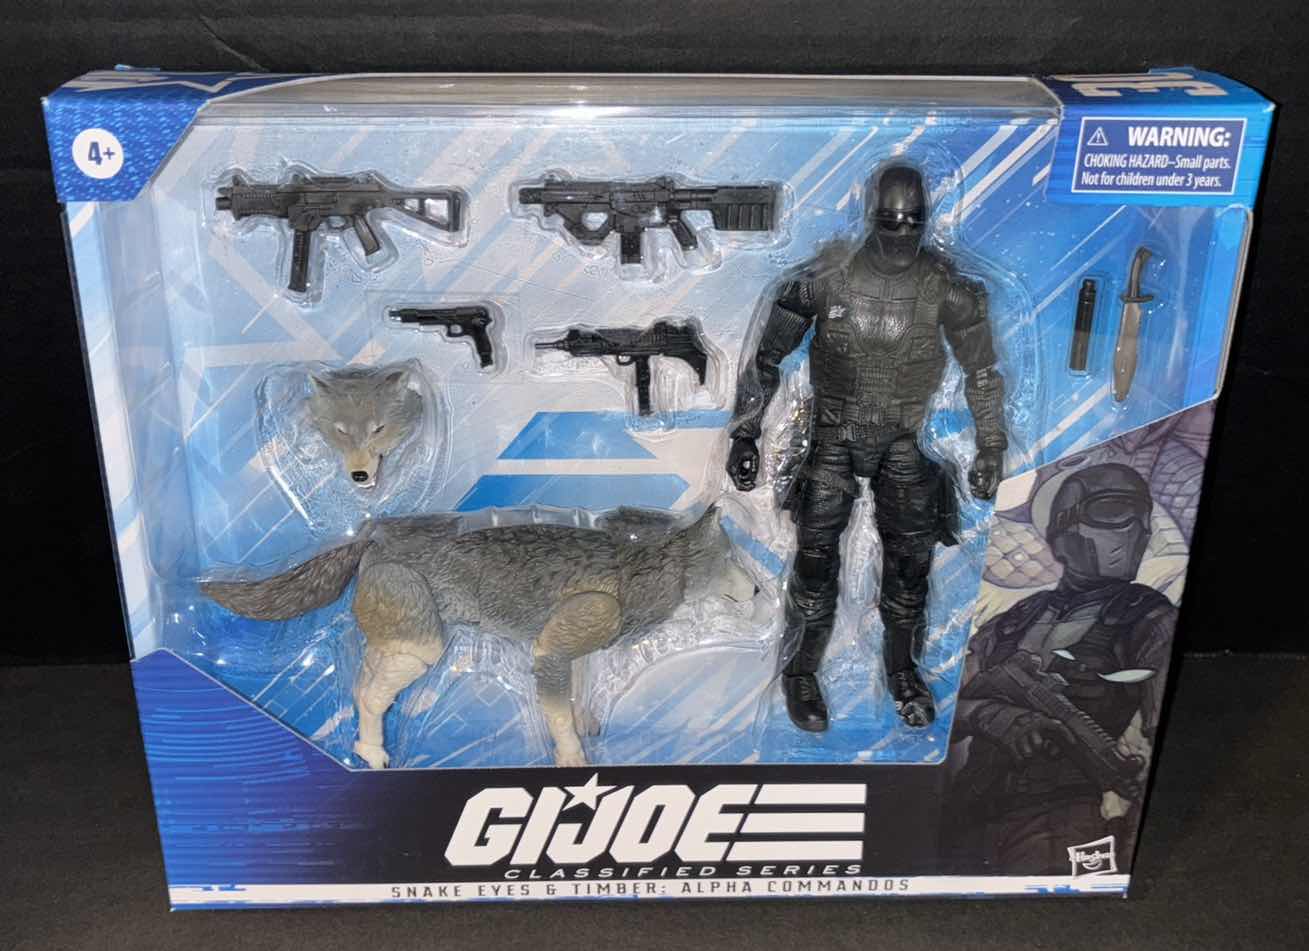 Photo 1 of NEW HASBRO G.I. JOE CLASSIFIED SERIES ACTION FIGURES & ACCESSORIES #30 “SNAKE EYES & TIMBER: ALPHA COMMANDOS”